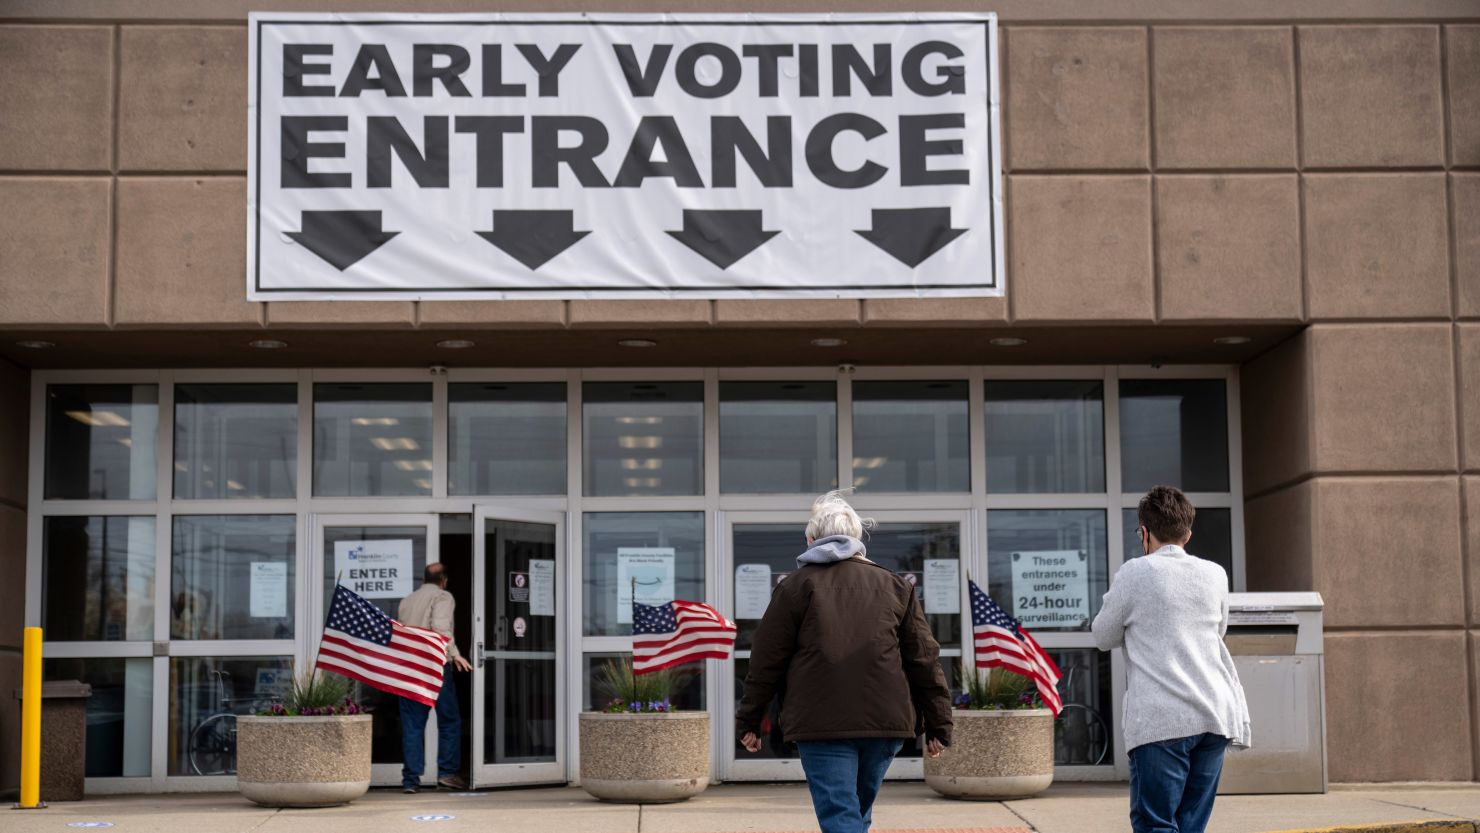 Voters arrive at a polling location in Columbus, Ohio, on April 26, 2022, to cast their ballots for the May 3 primaries.